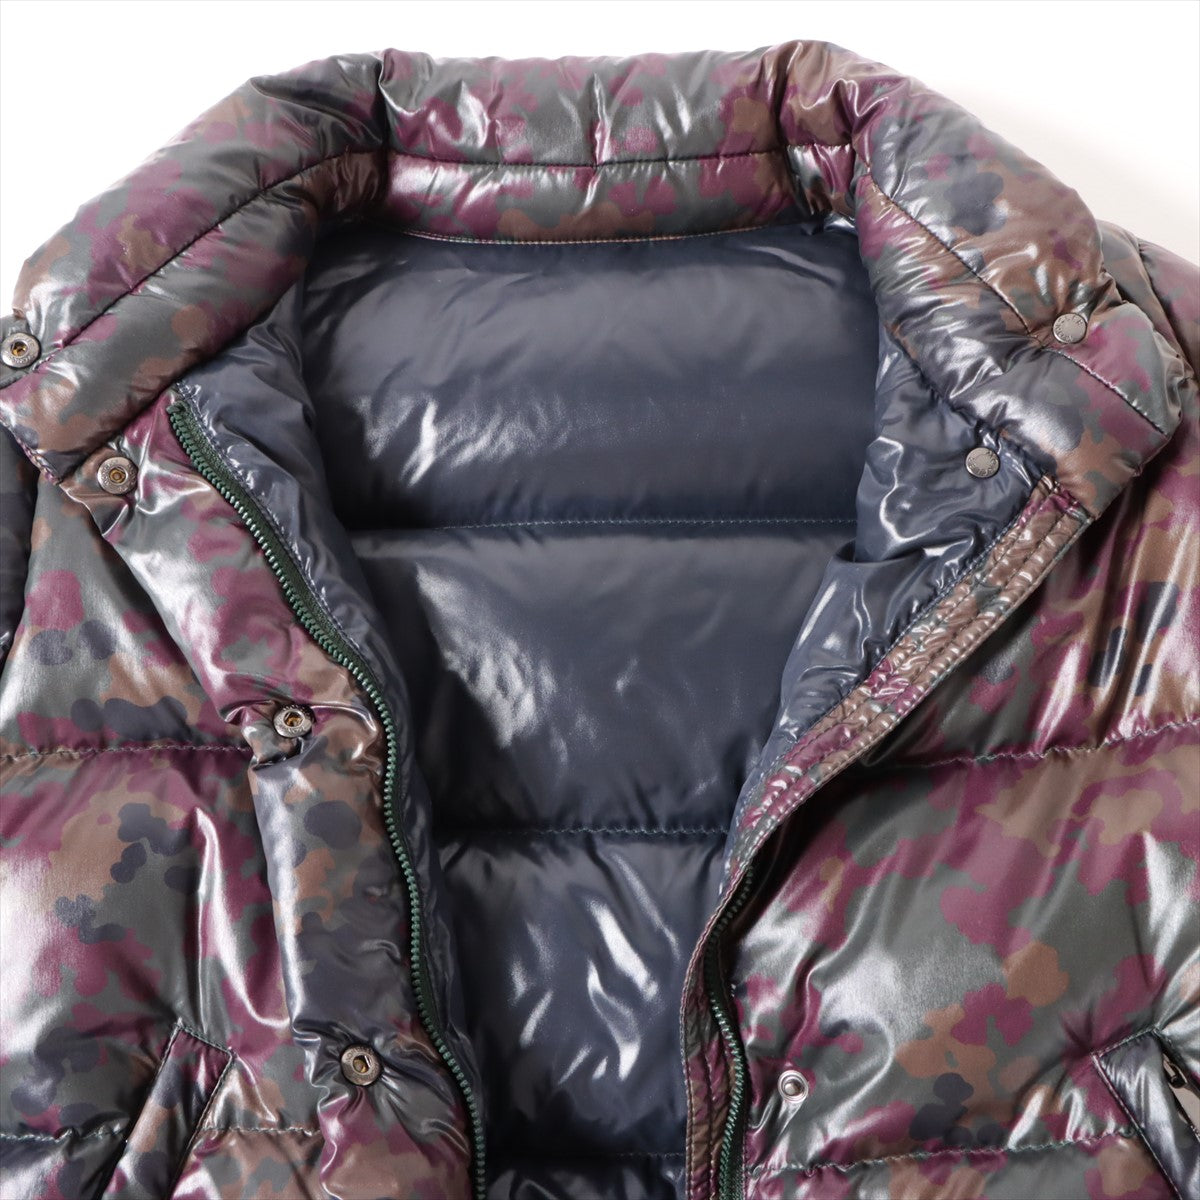 Moncler BRETHIL 16 years Nylon Down jacket 0 Ladies' Multicolor  Camouflage